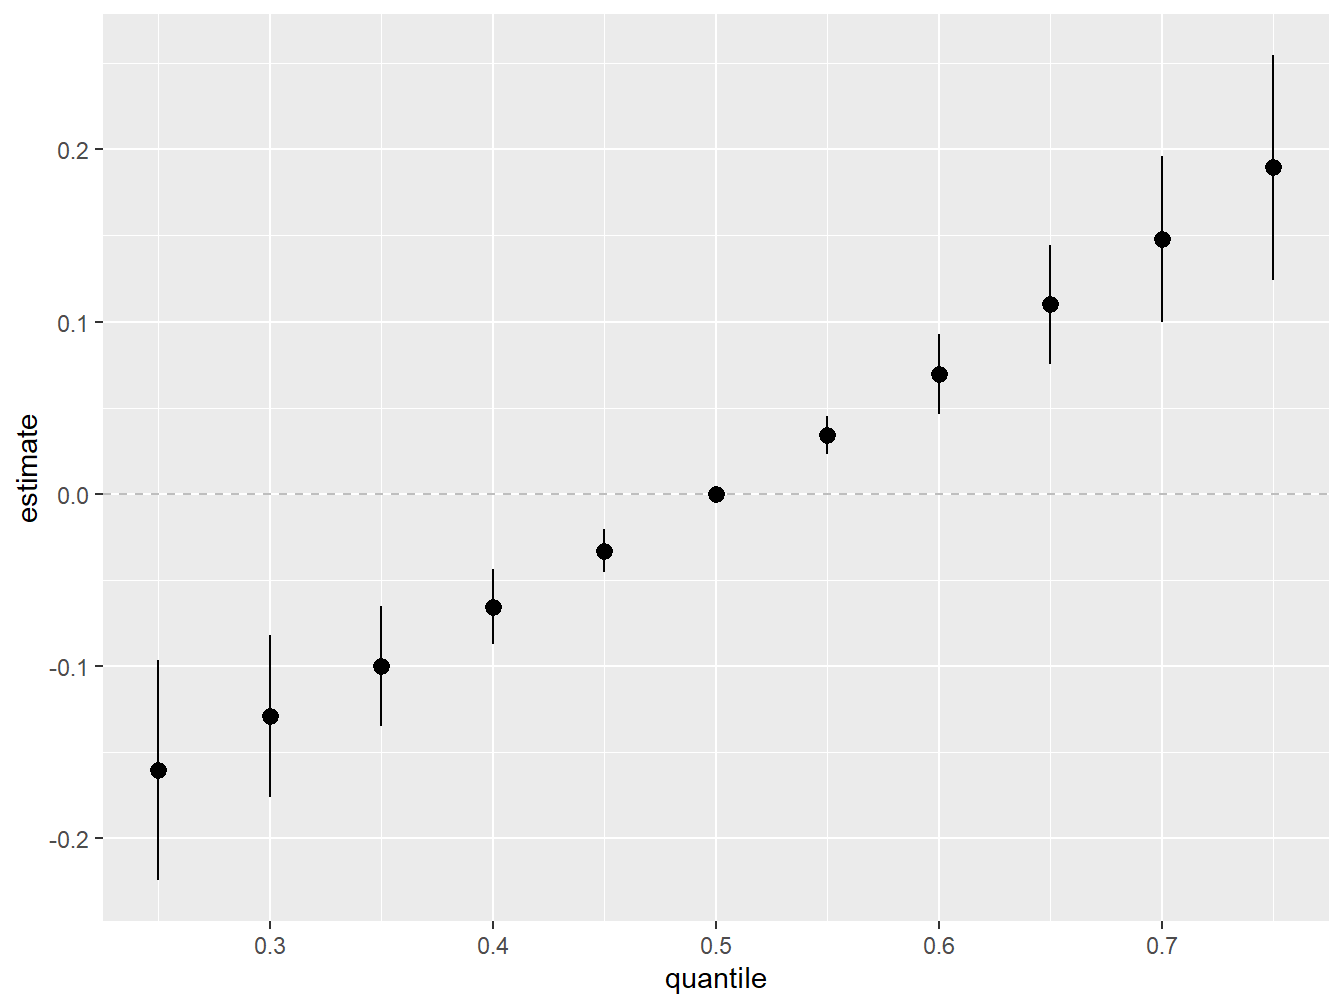 Overall Mixture Effect from BKMR in the simulated dataset